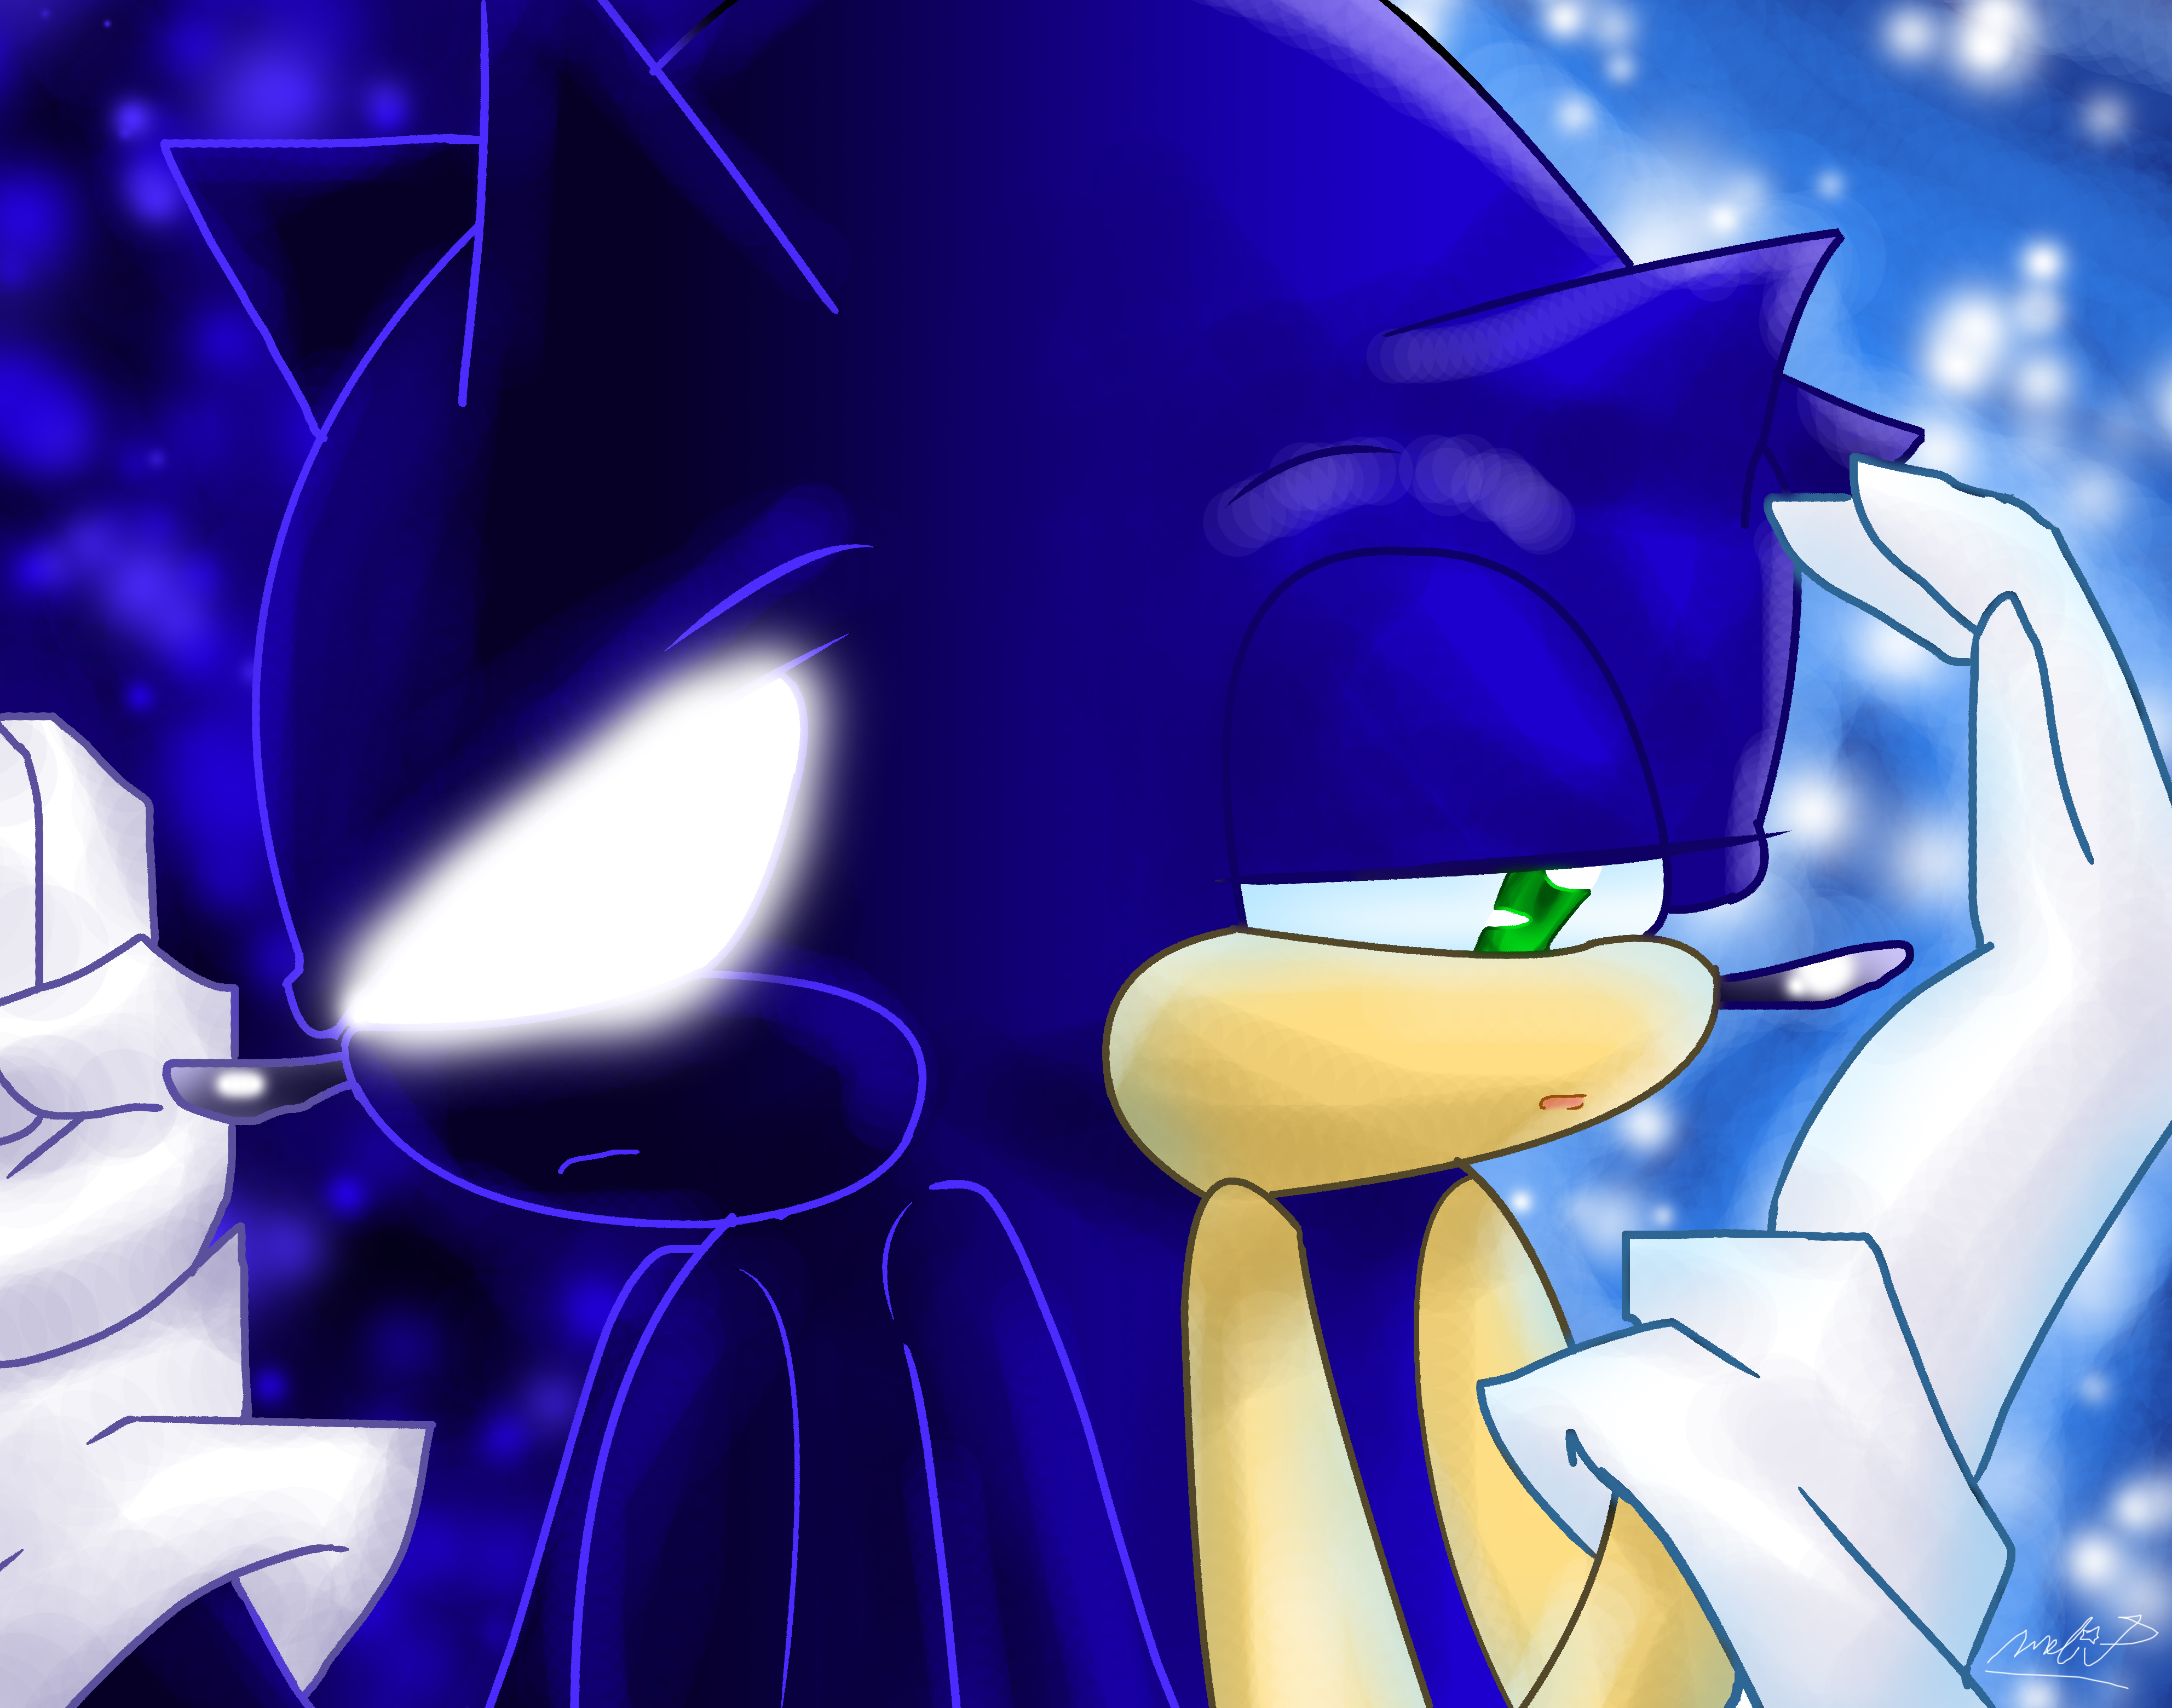 Anime Sonic X HD Wallpaper | Background Image